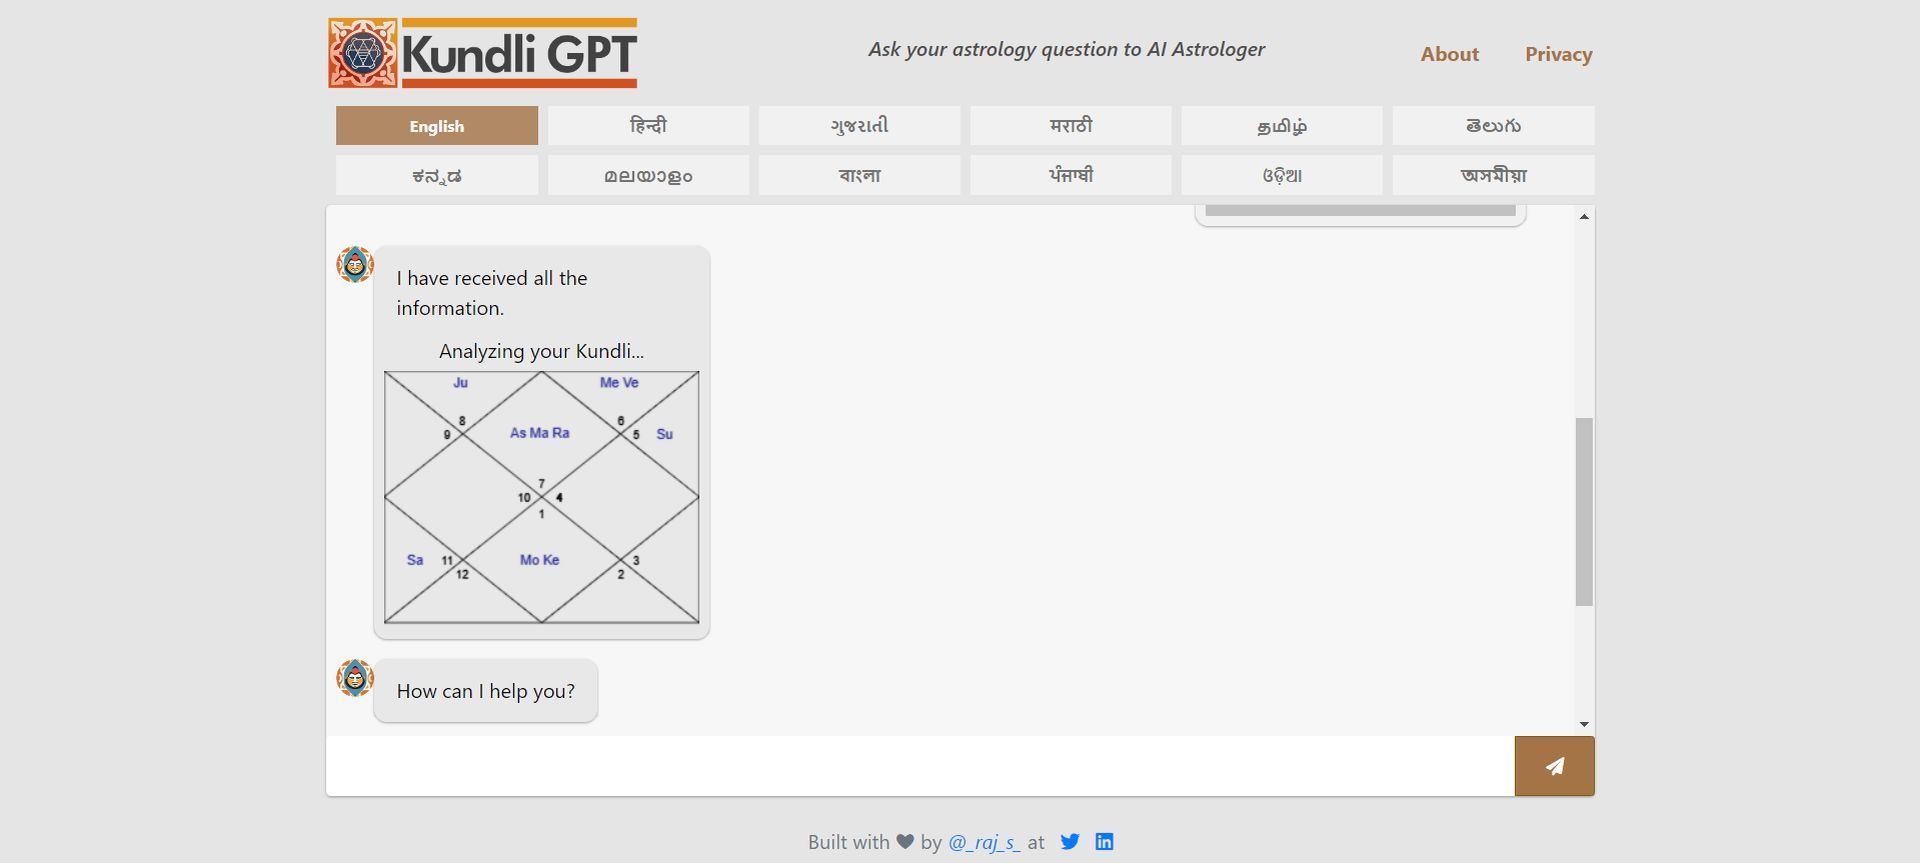 How to use Kundli GPT AI: Alternatives and more (Image credit)